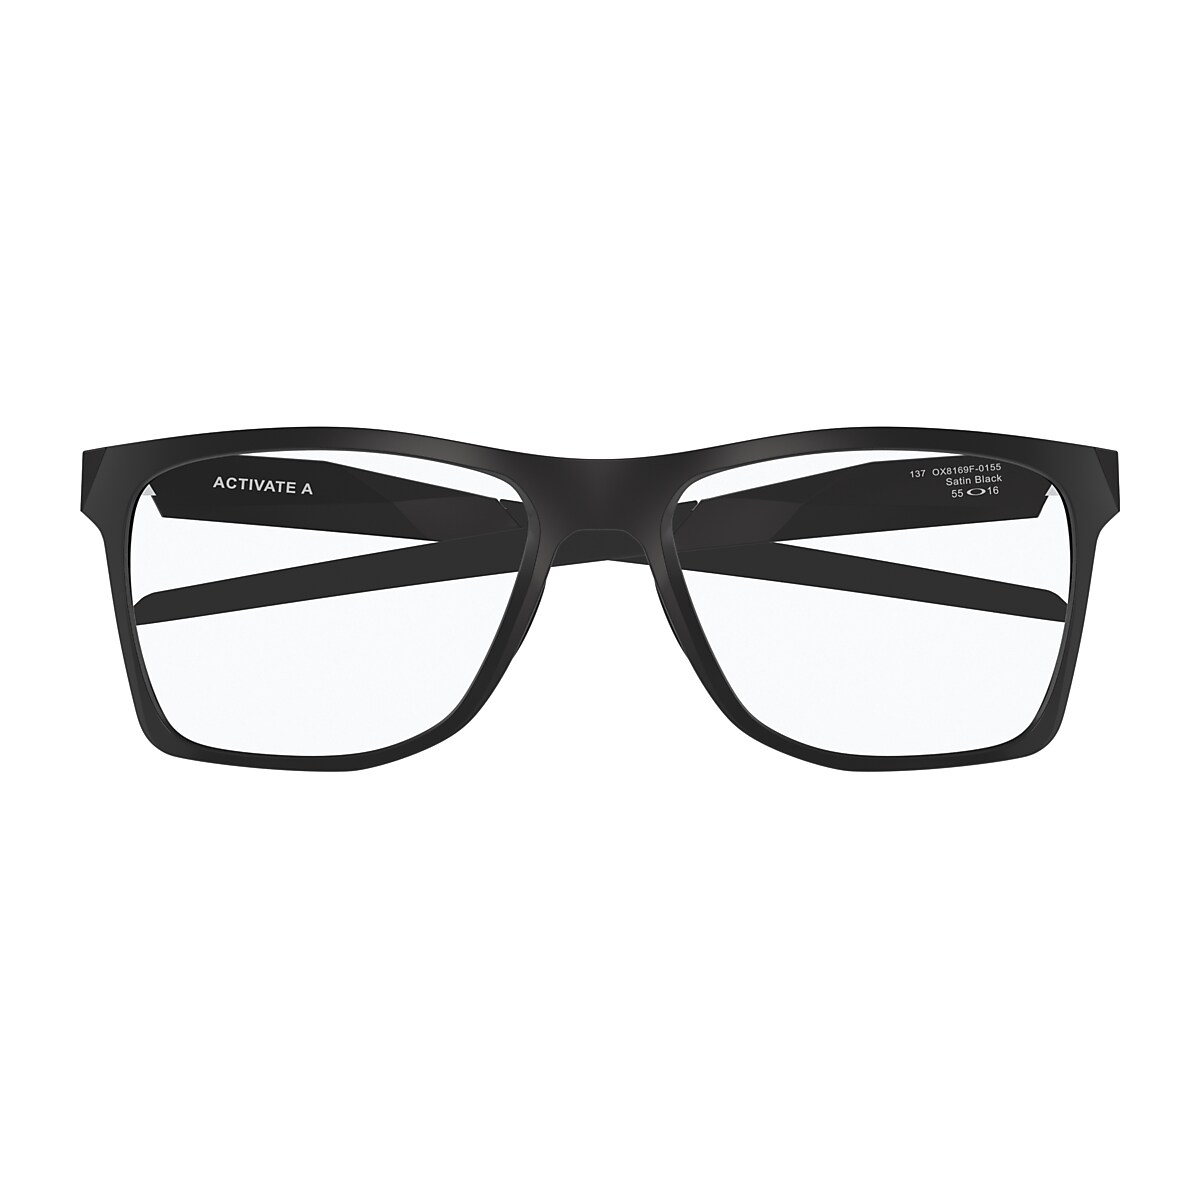 https://assets.oakley.com/is/image/OakleyEYE/888392516886_activate-a_satin-black-demo-lens_main_046.png?impolicy=SEO_1x1